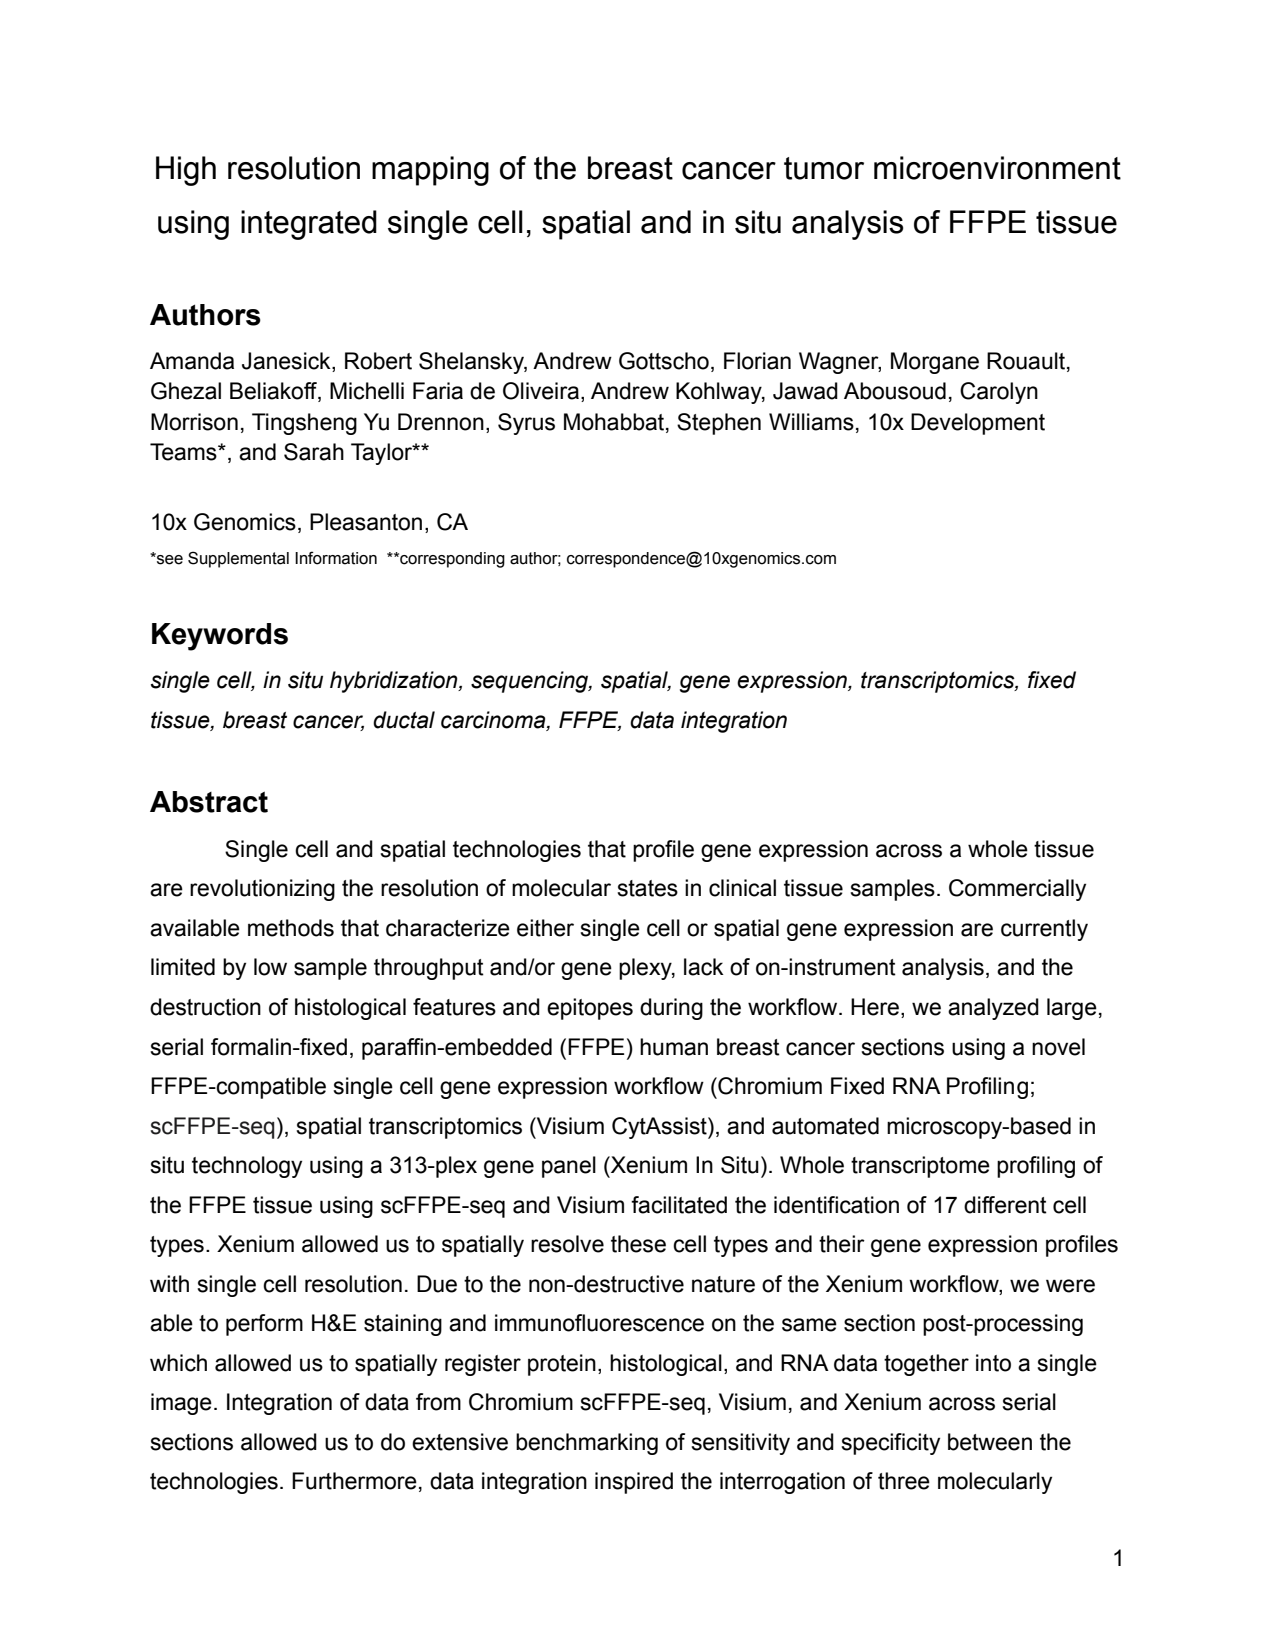 High resolution mapping of the breast cancer tumor microenvironment using integrated single cell, spatial and in situ analysis of FFPE tissue